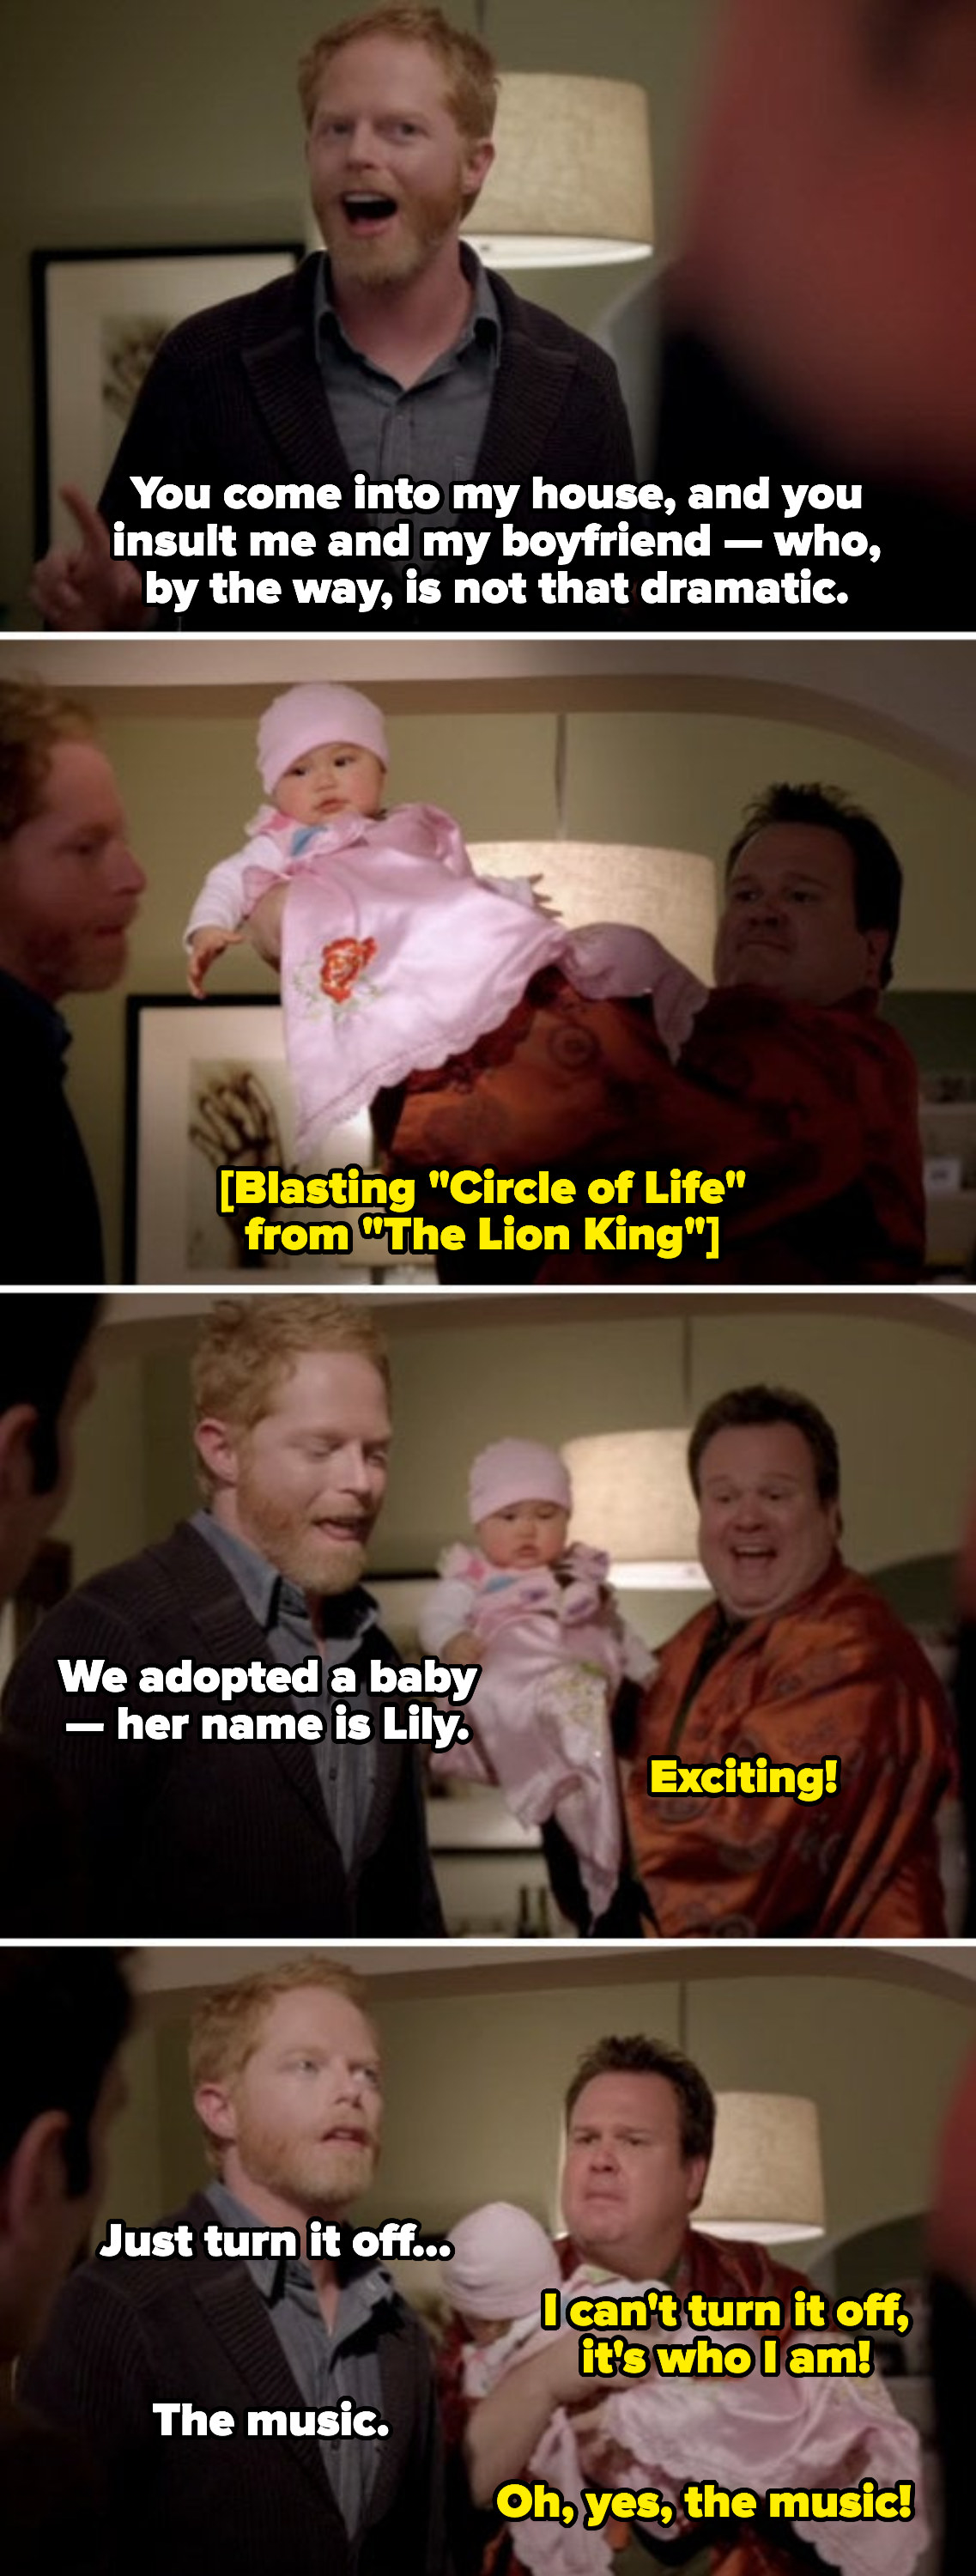 Cameron introducing Lily to the family by raising her in the air like Simba in &quot;The Lion King&quot;